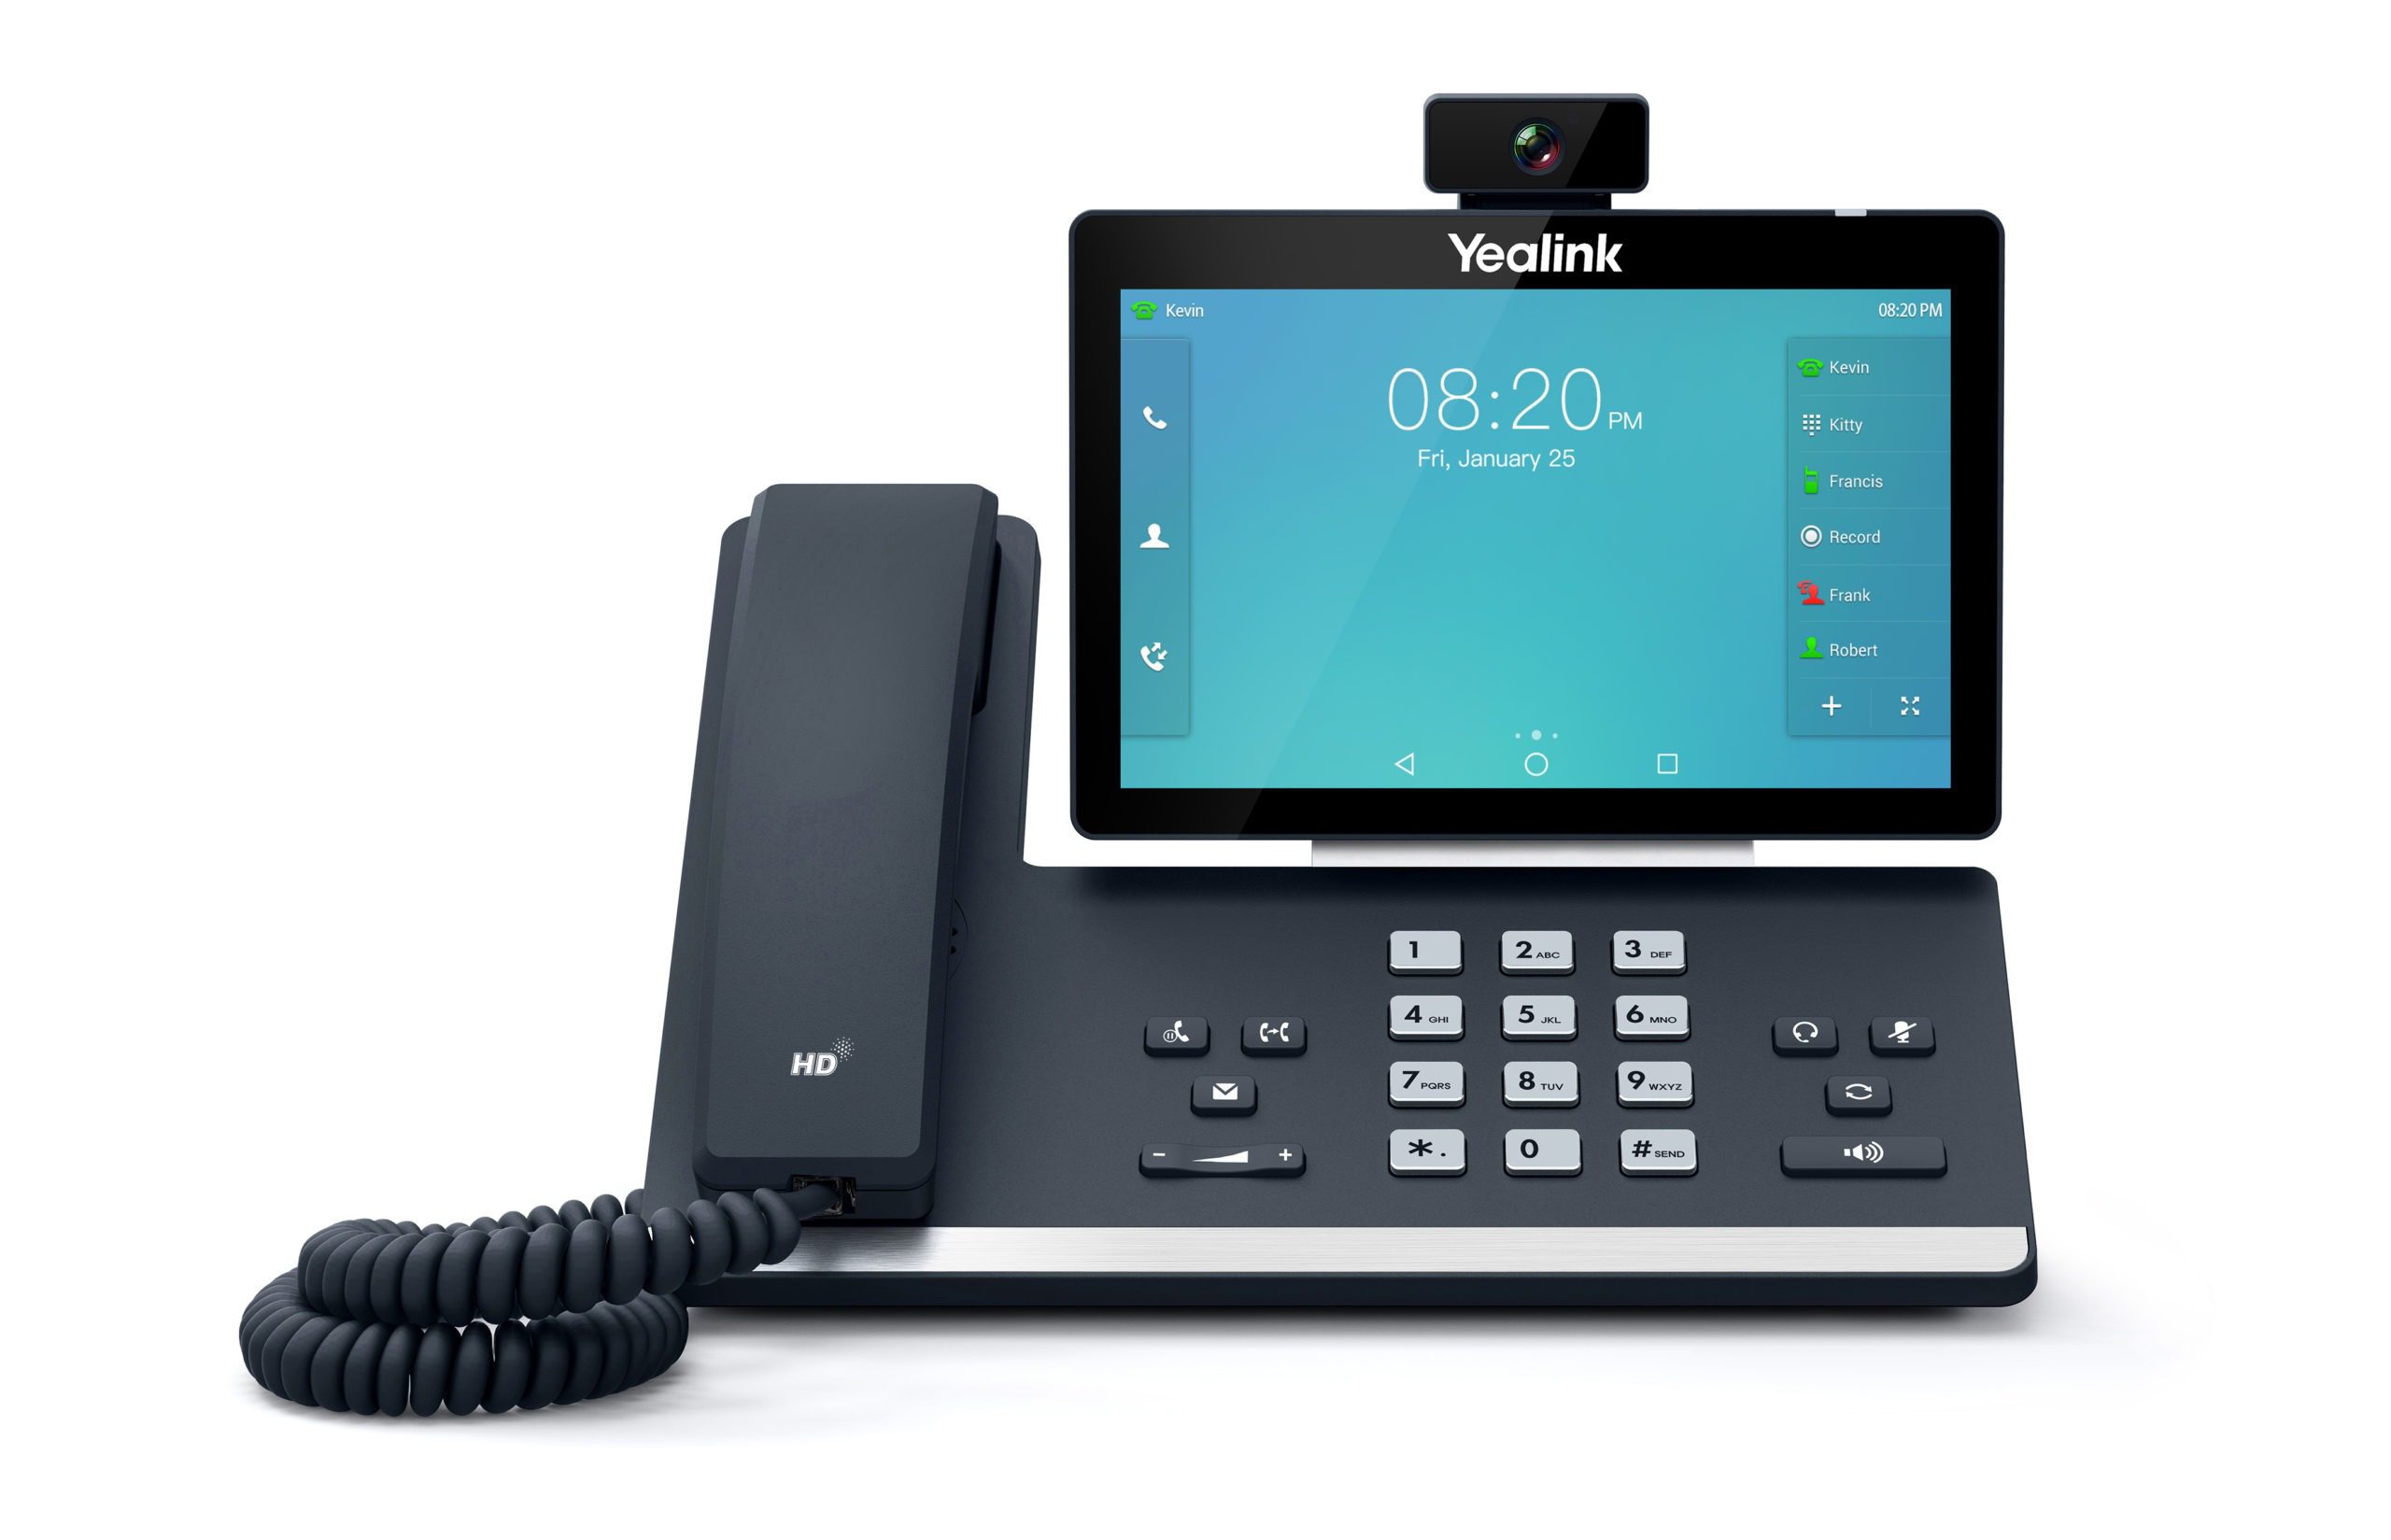 The Yealink T58 Can be Used In Our Video Conferencing Beta Test